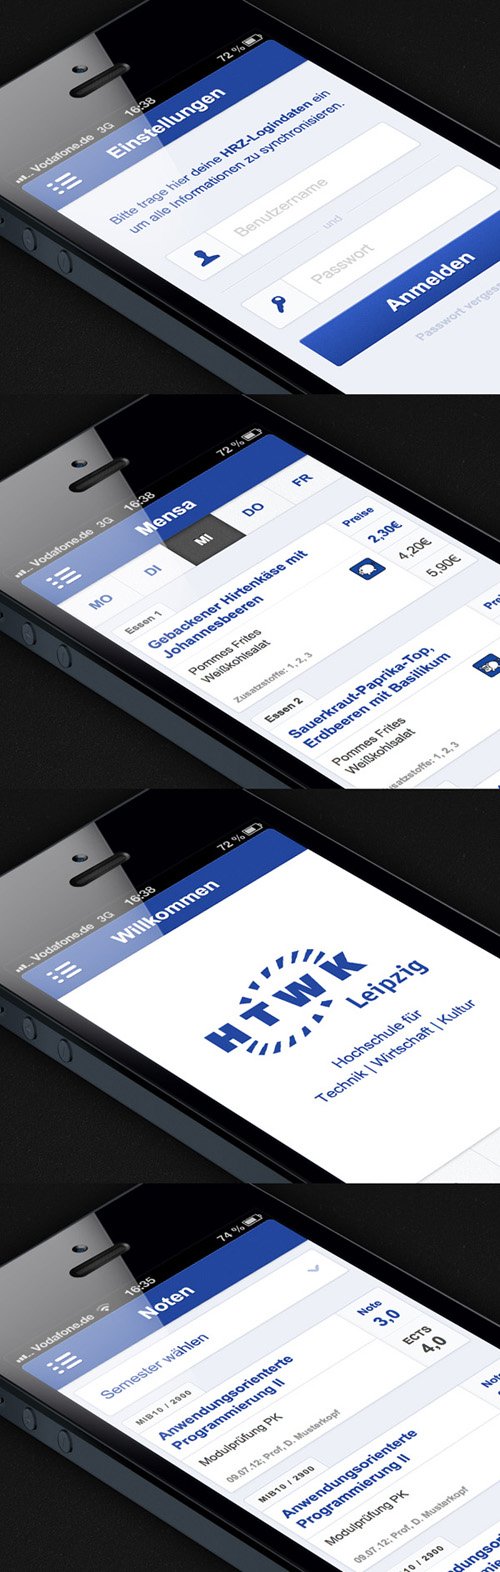 Flat Mobile UI Design and UX-46